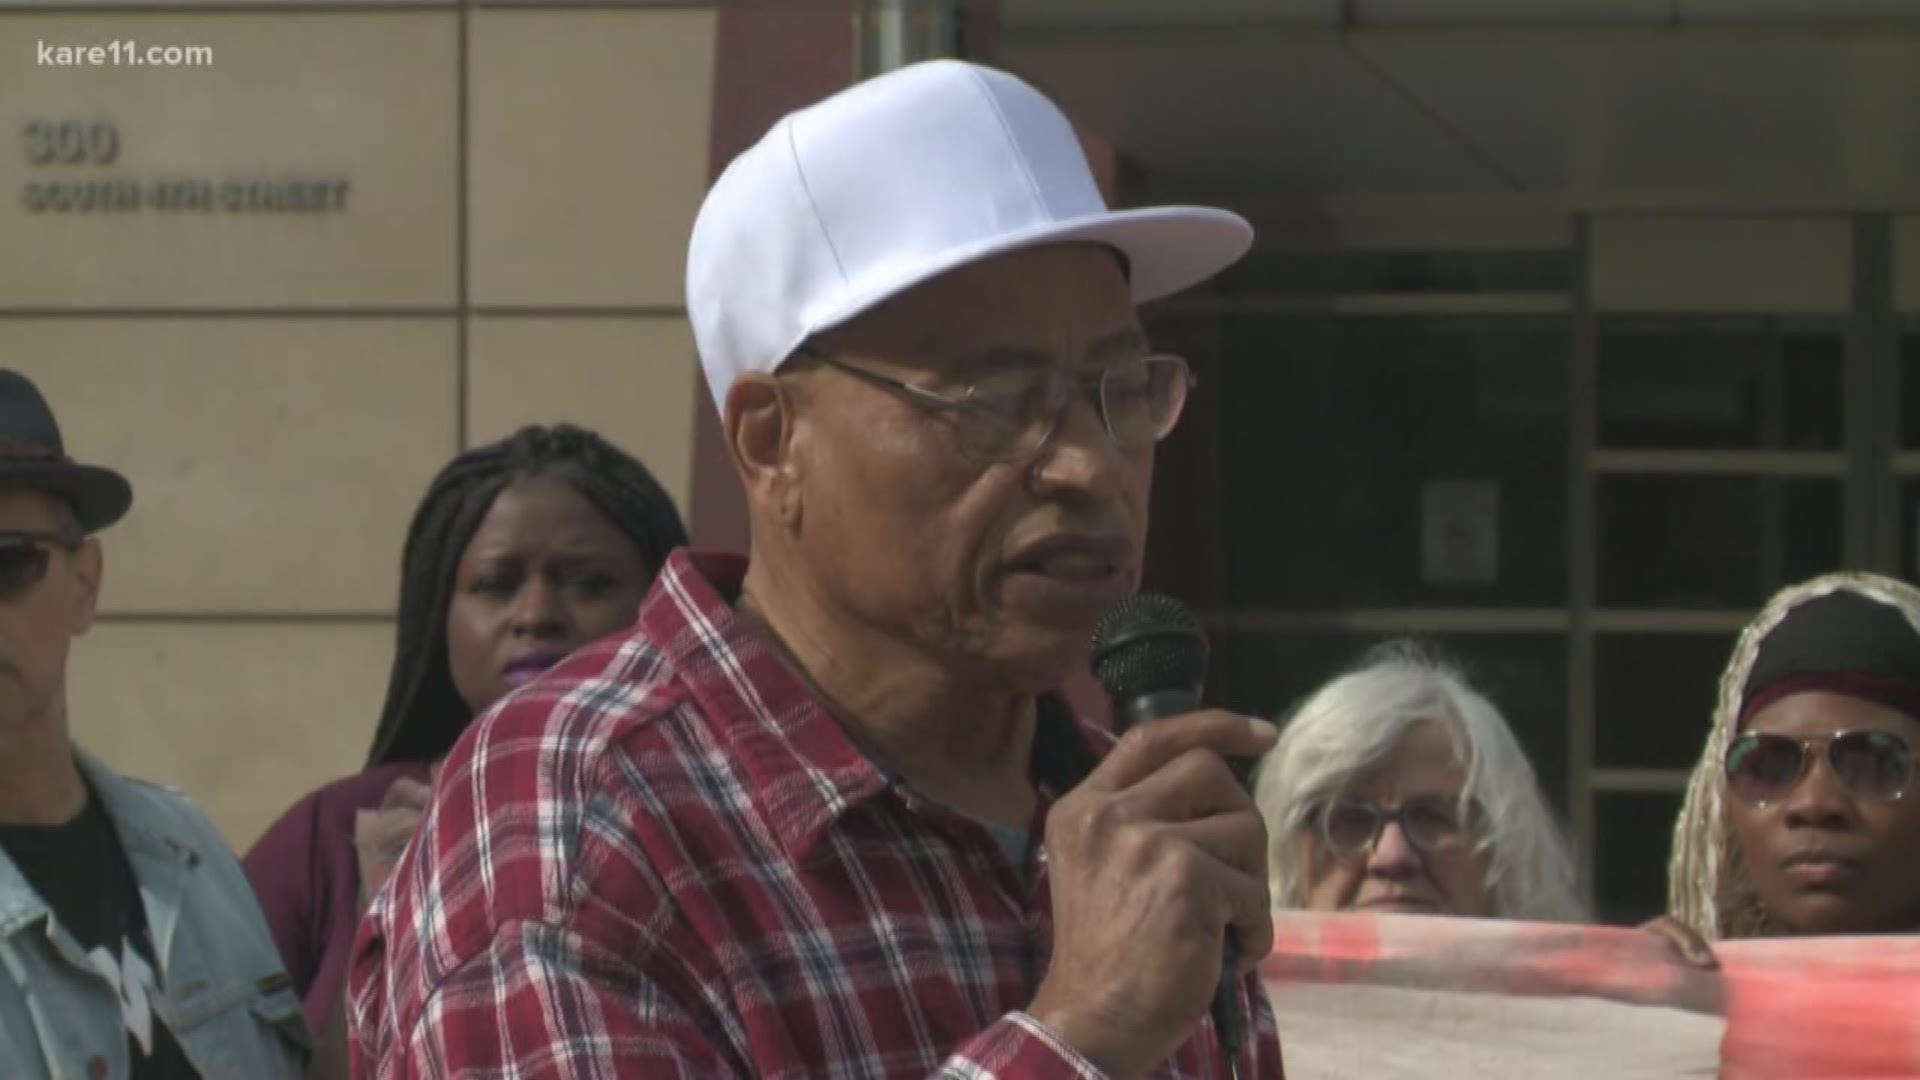 Supporters and family members of Jamar Clark want a $20 million settlement from the city, equal to the amount paid to Justine Ruszczyk Damond's family.